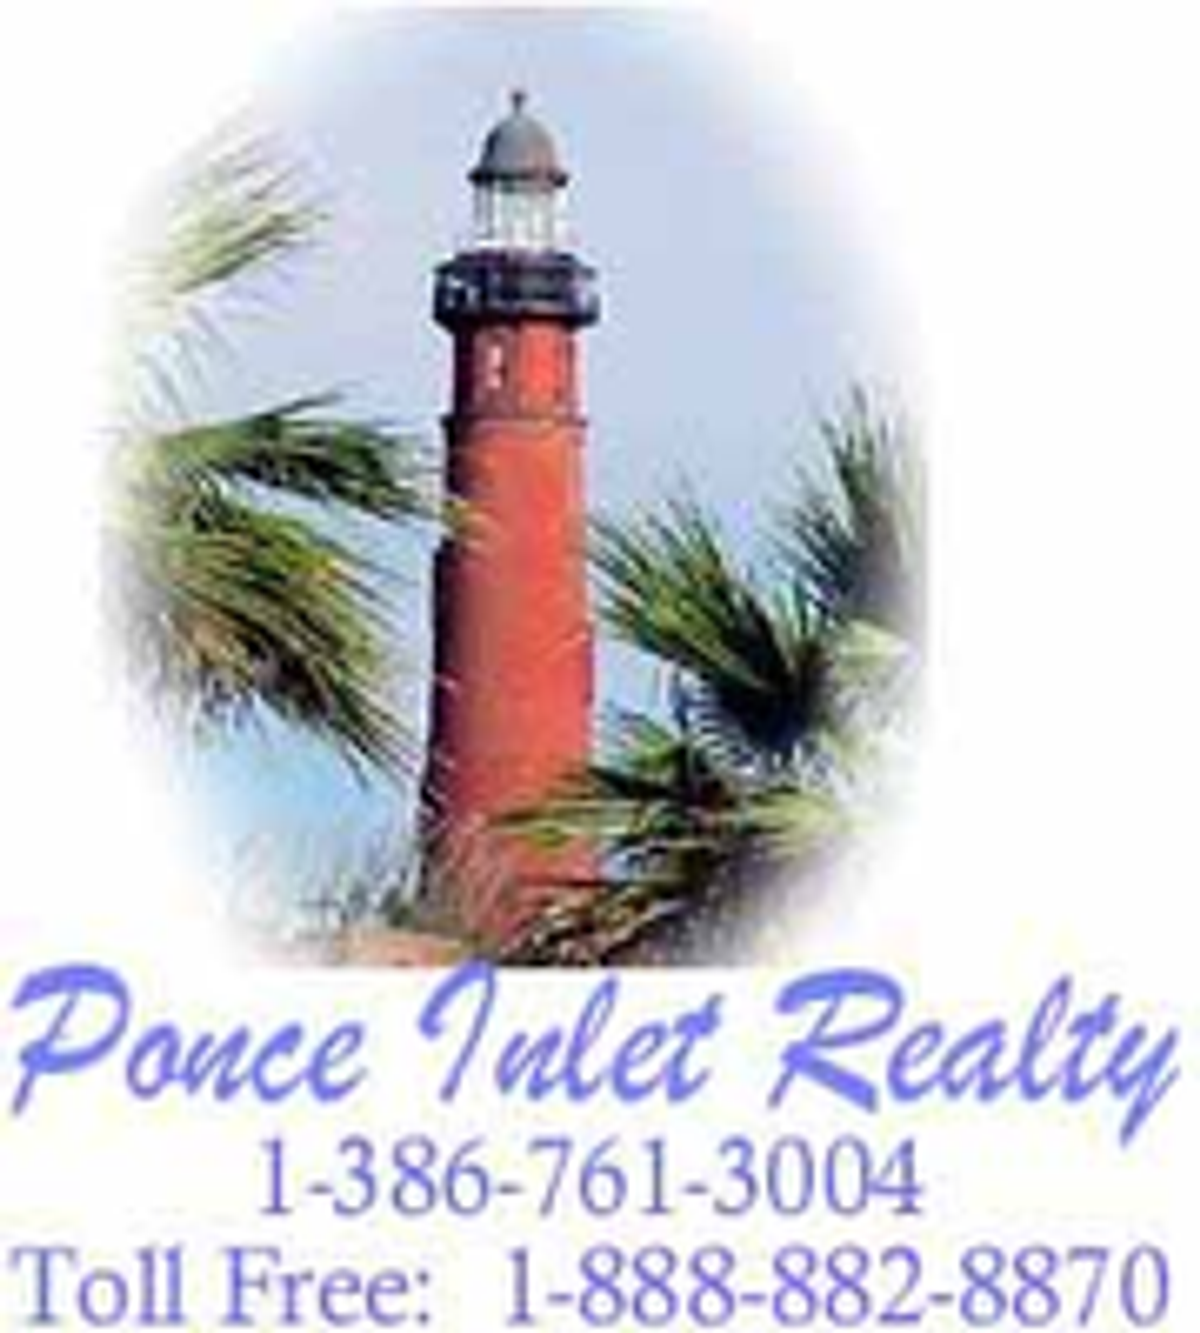 Photo for Beth Beaudet, Listing Agent at Ponce Inlet Realty, Inc